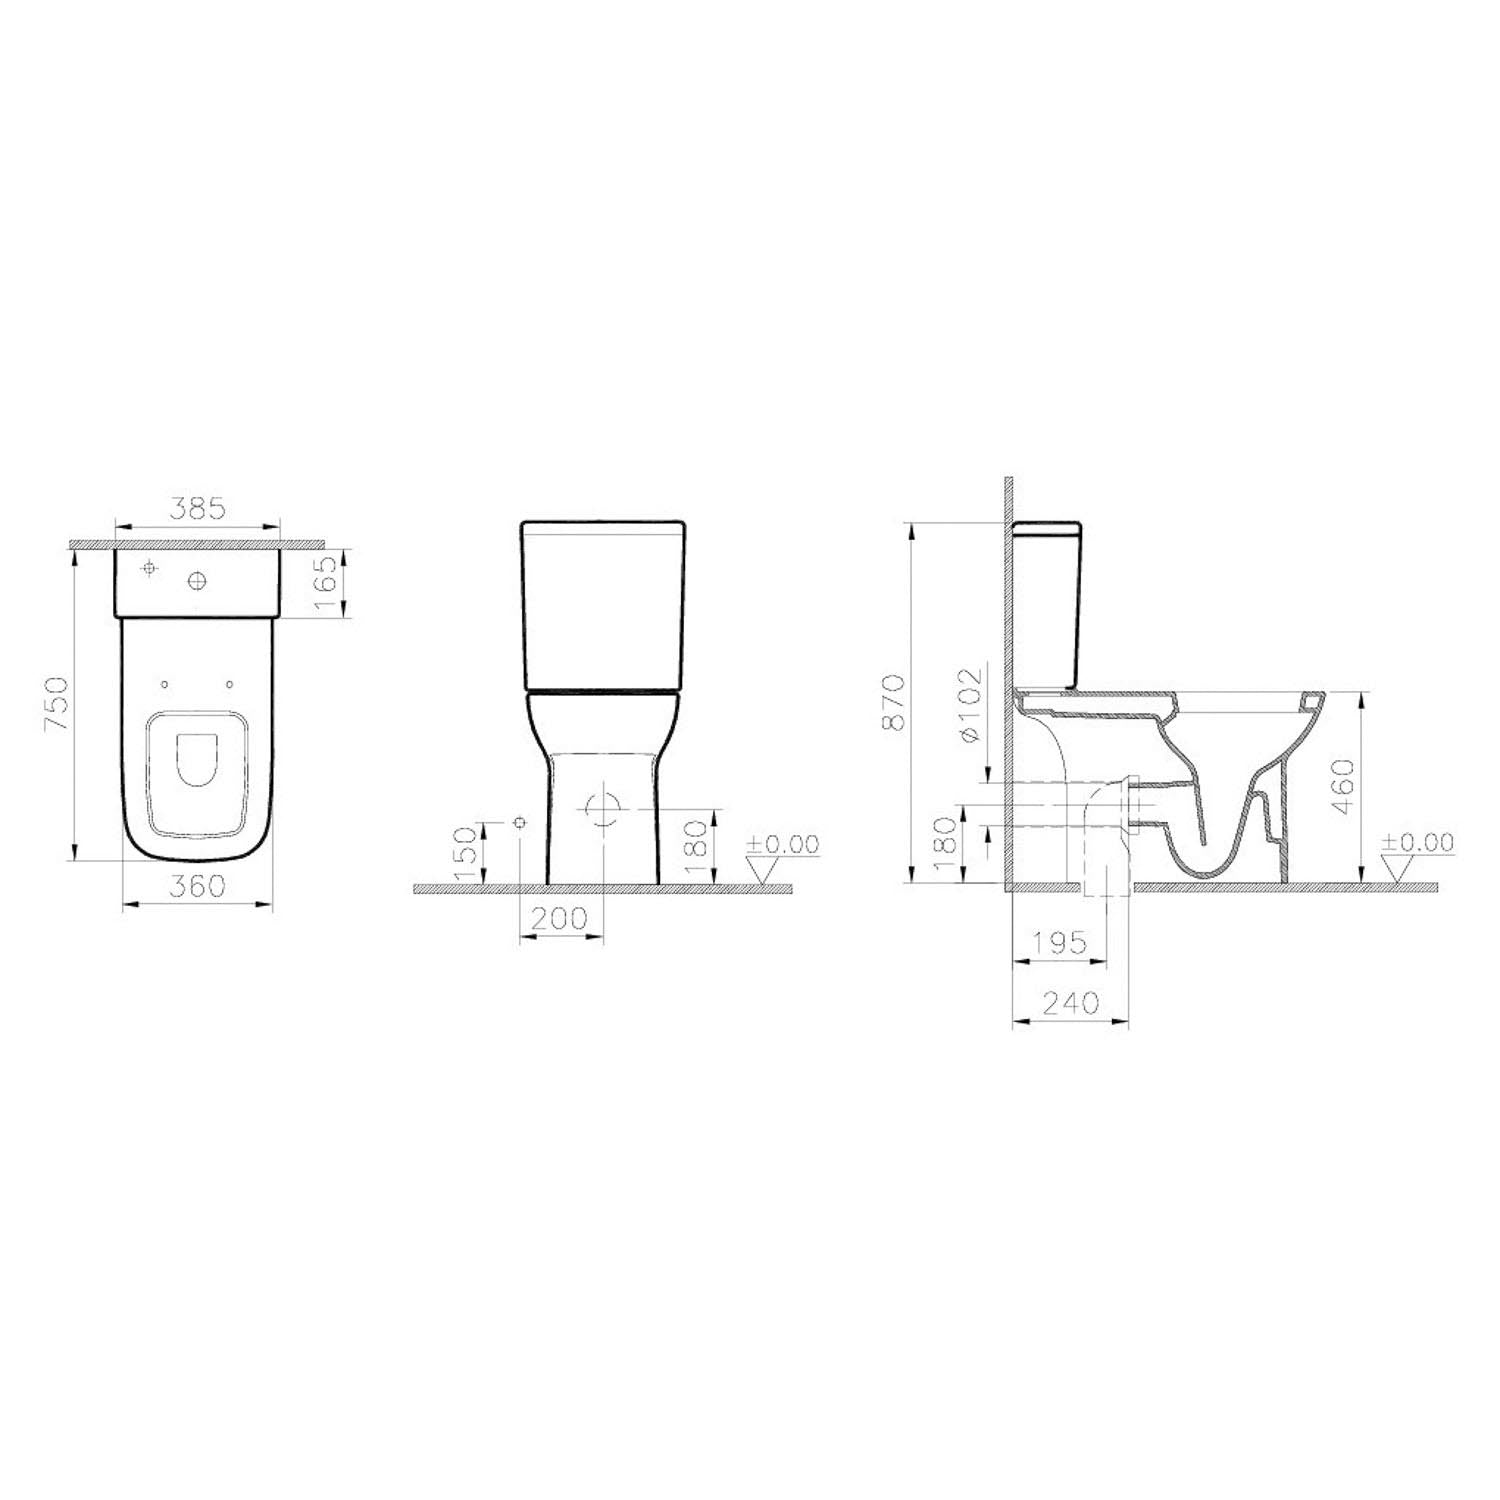 Consilio Comfort Height Close Coupled Toilet with the seat dimensional drawing